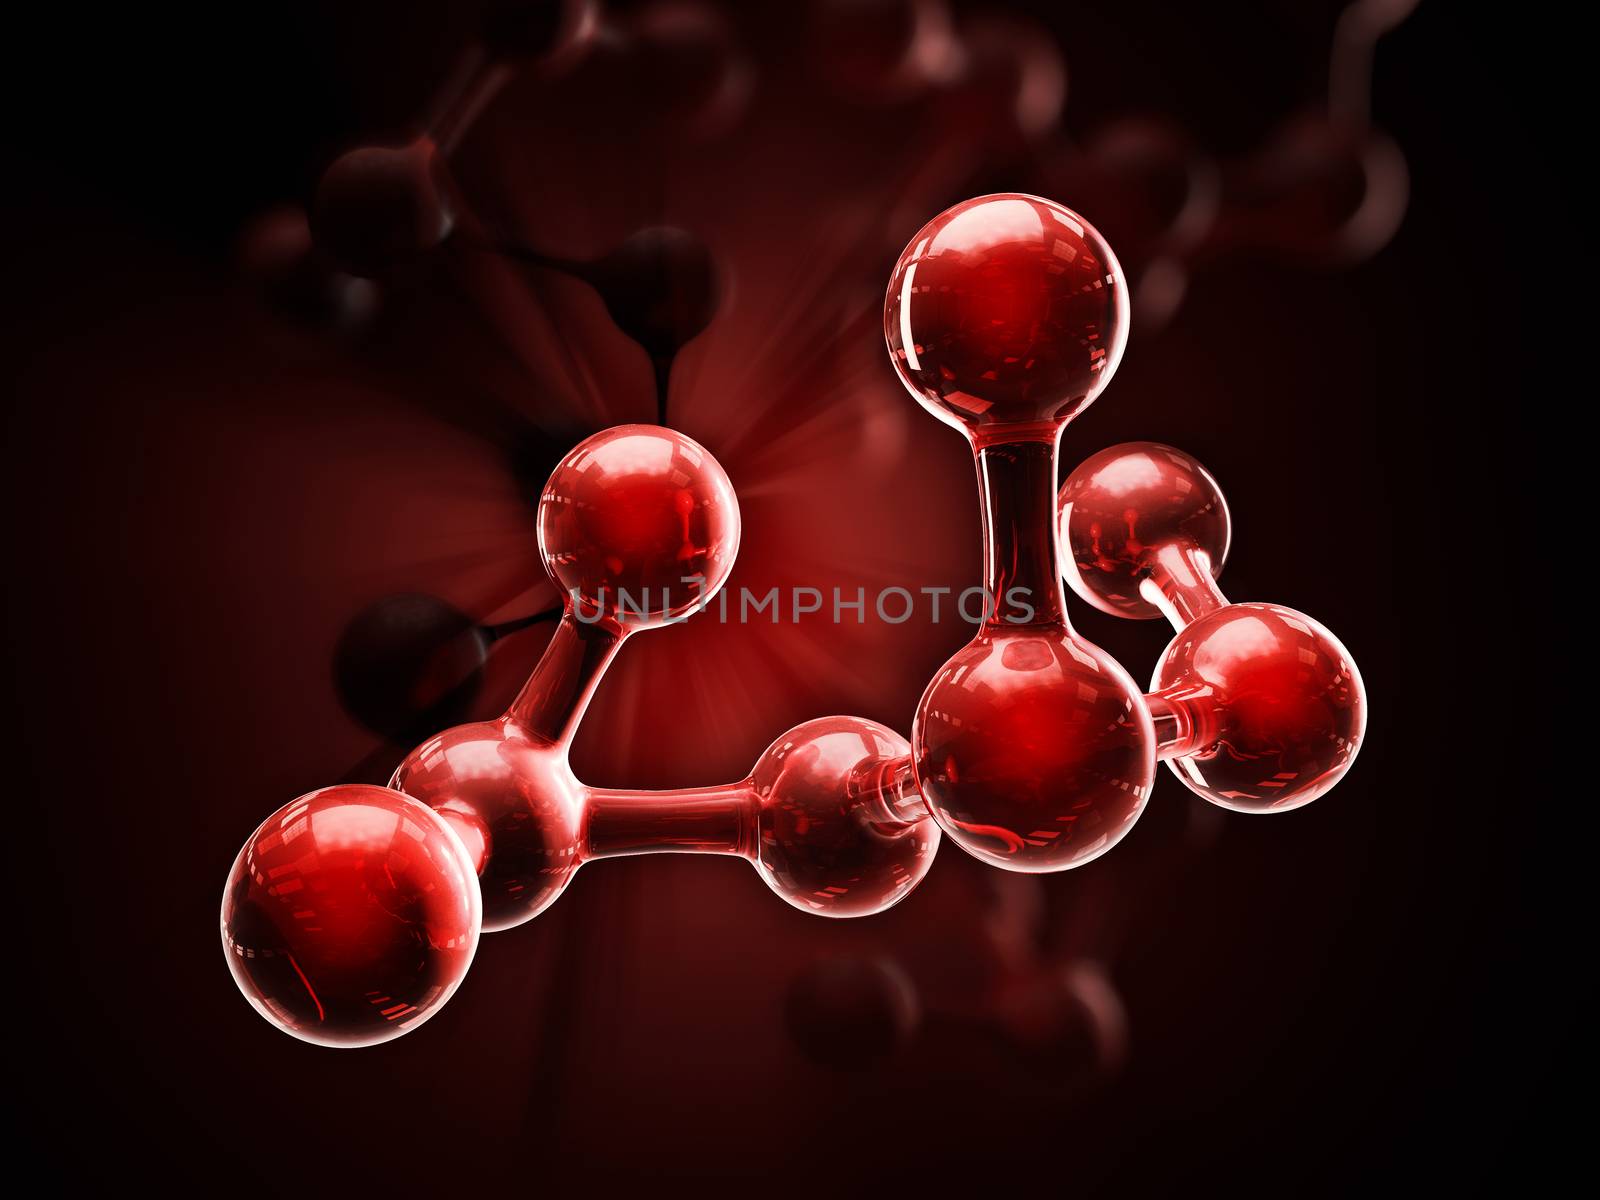 3d illustration of molecule model. Science or medical background with molecules. by tussik